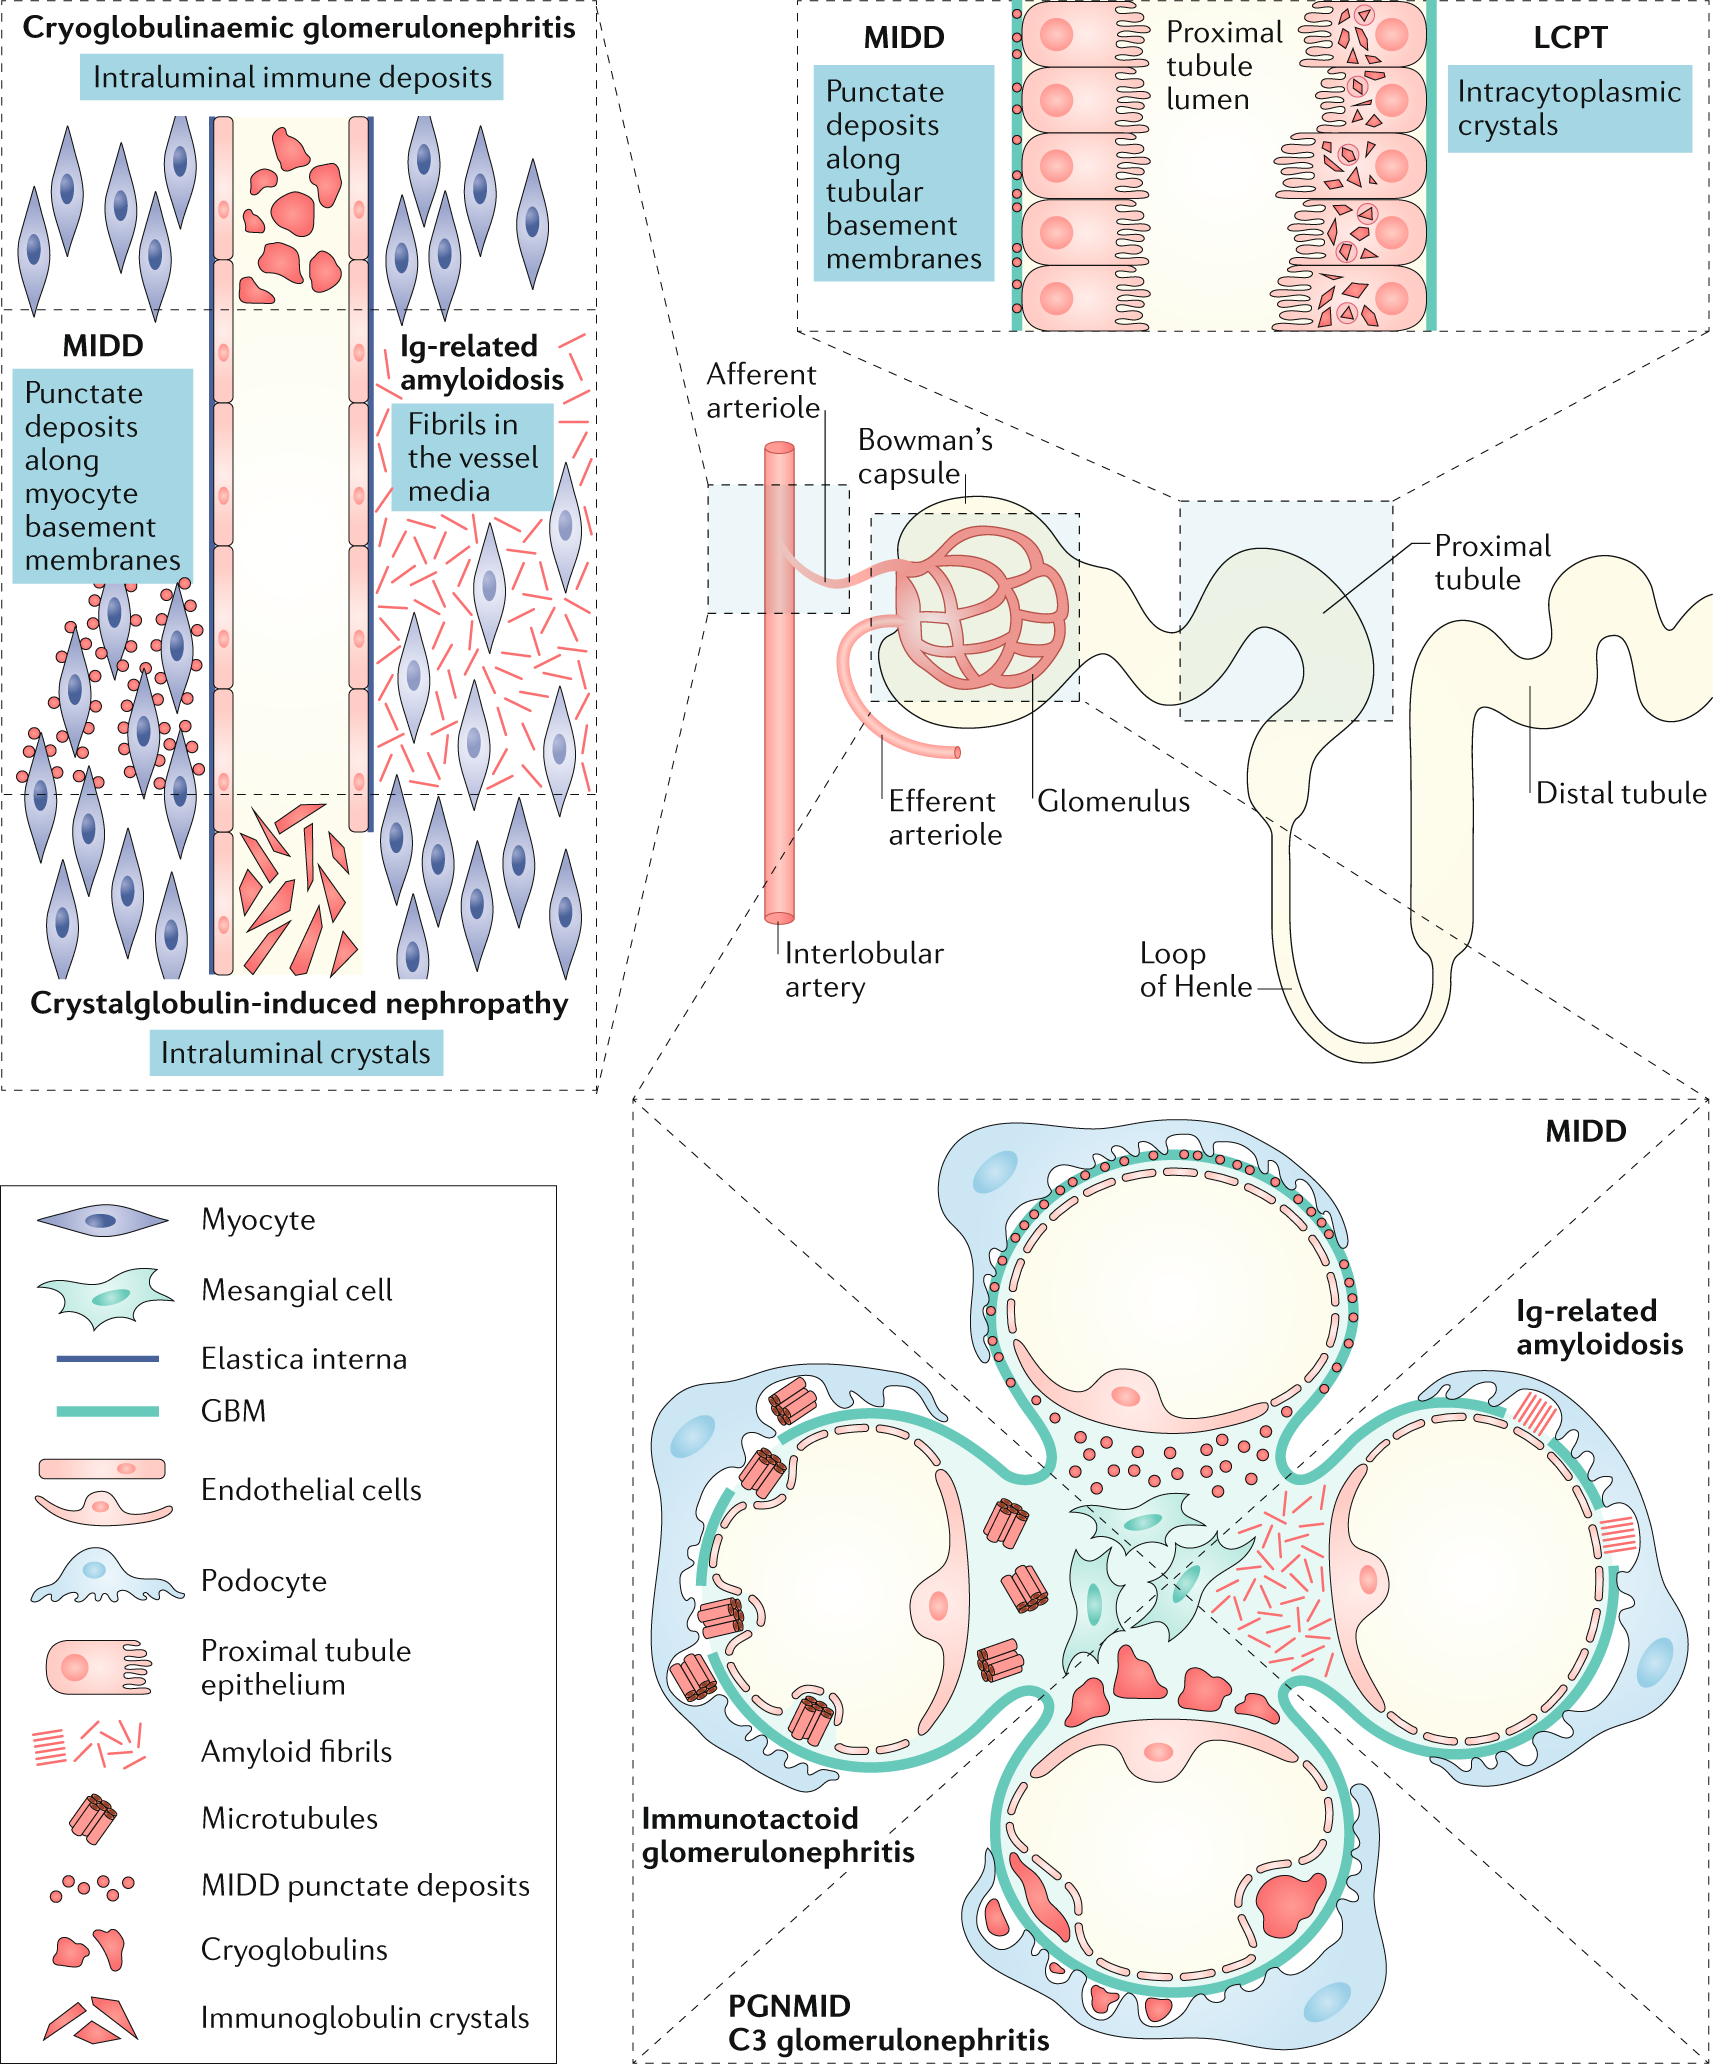 The evaluation of monoclonal gammopathy of renal significance: a consensus  report of the International Kidney and Monoclonal Gammopathy Research Group  | Nature Reviews Nephrology